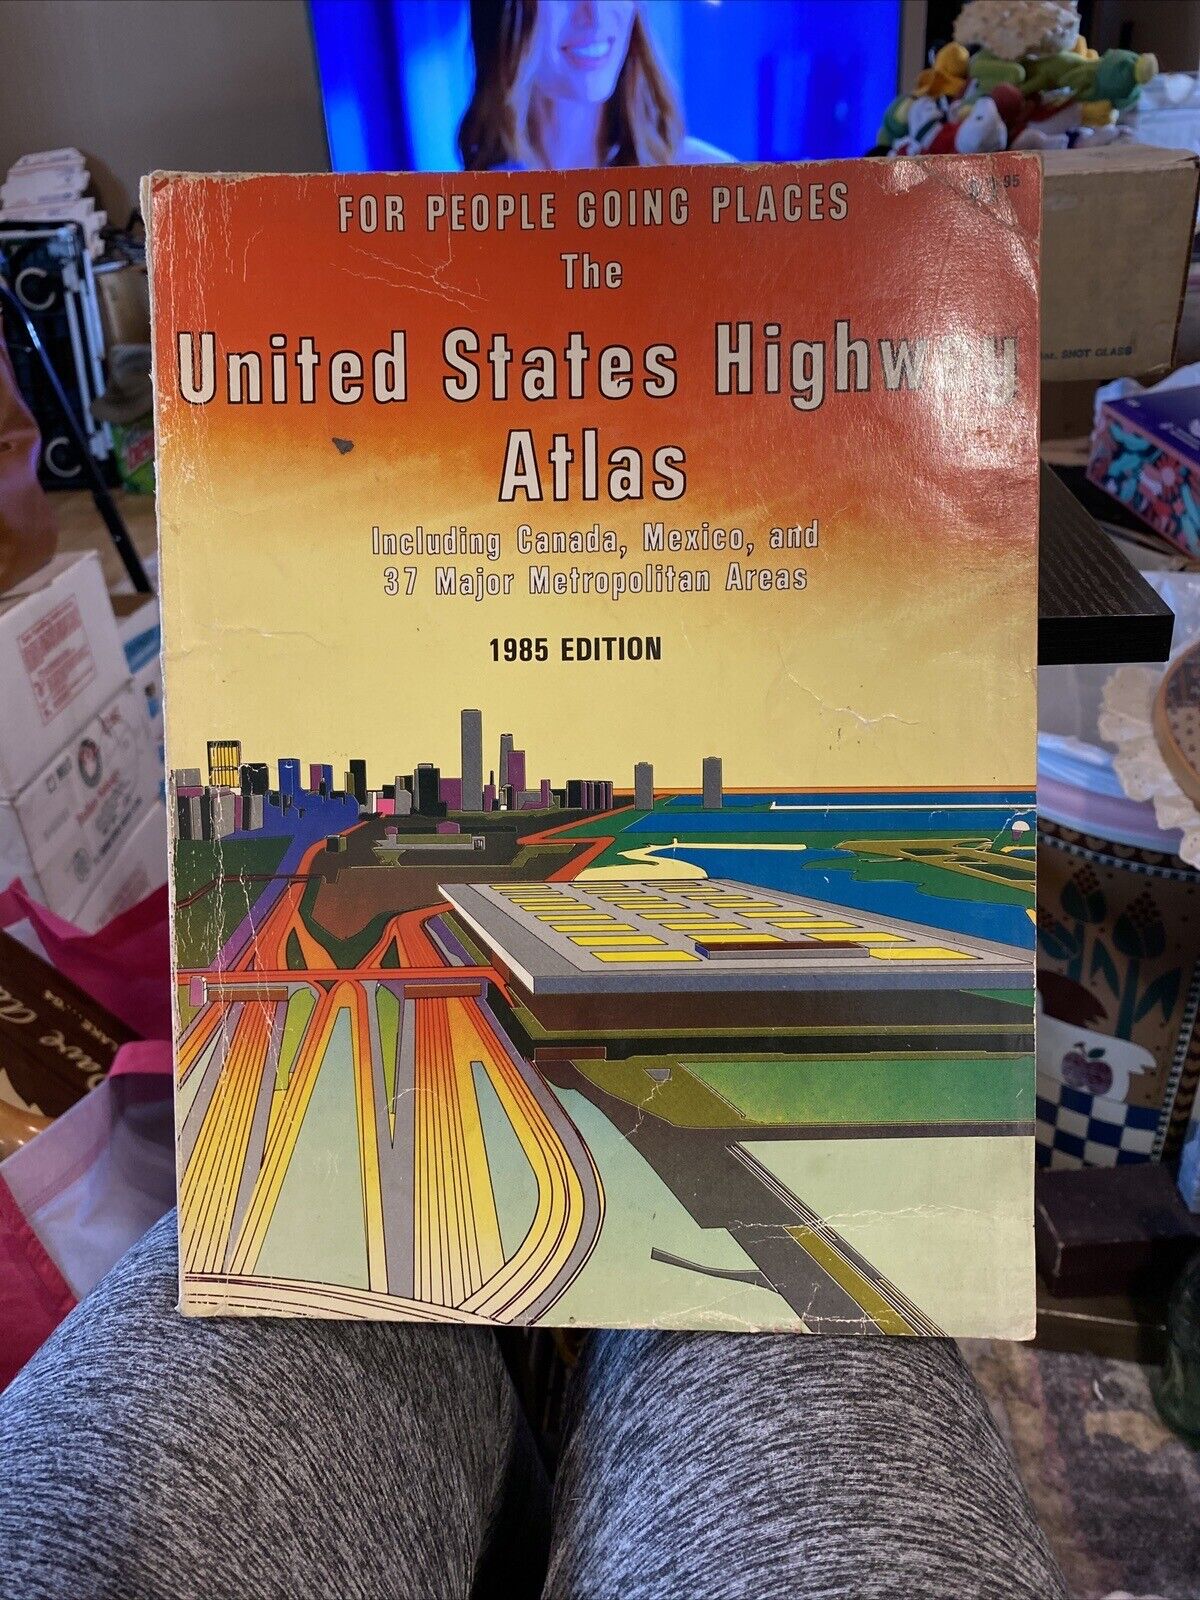 Vintage for people going places that the United States Highway atlas...